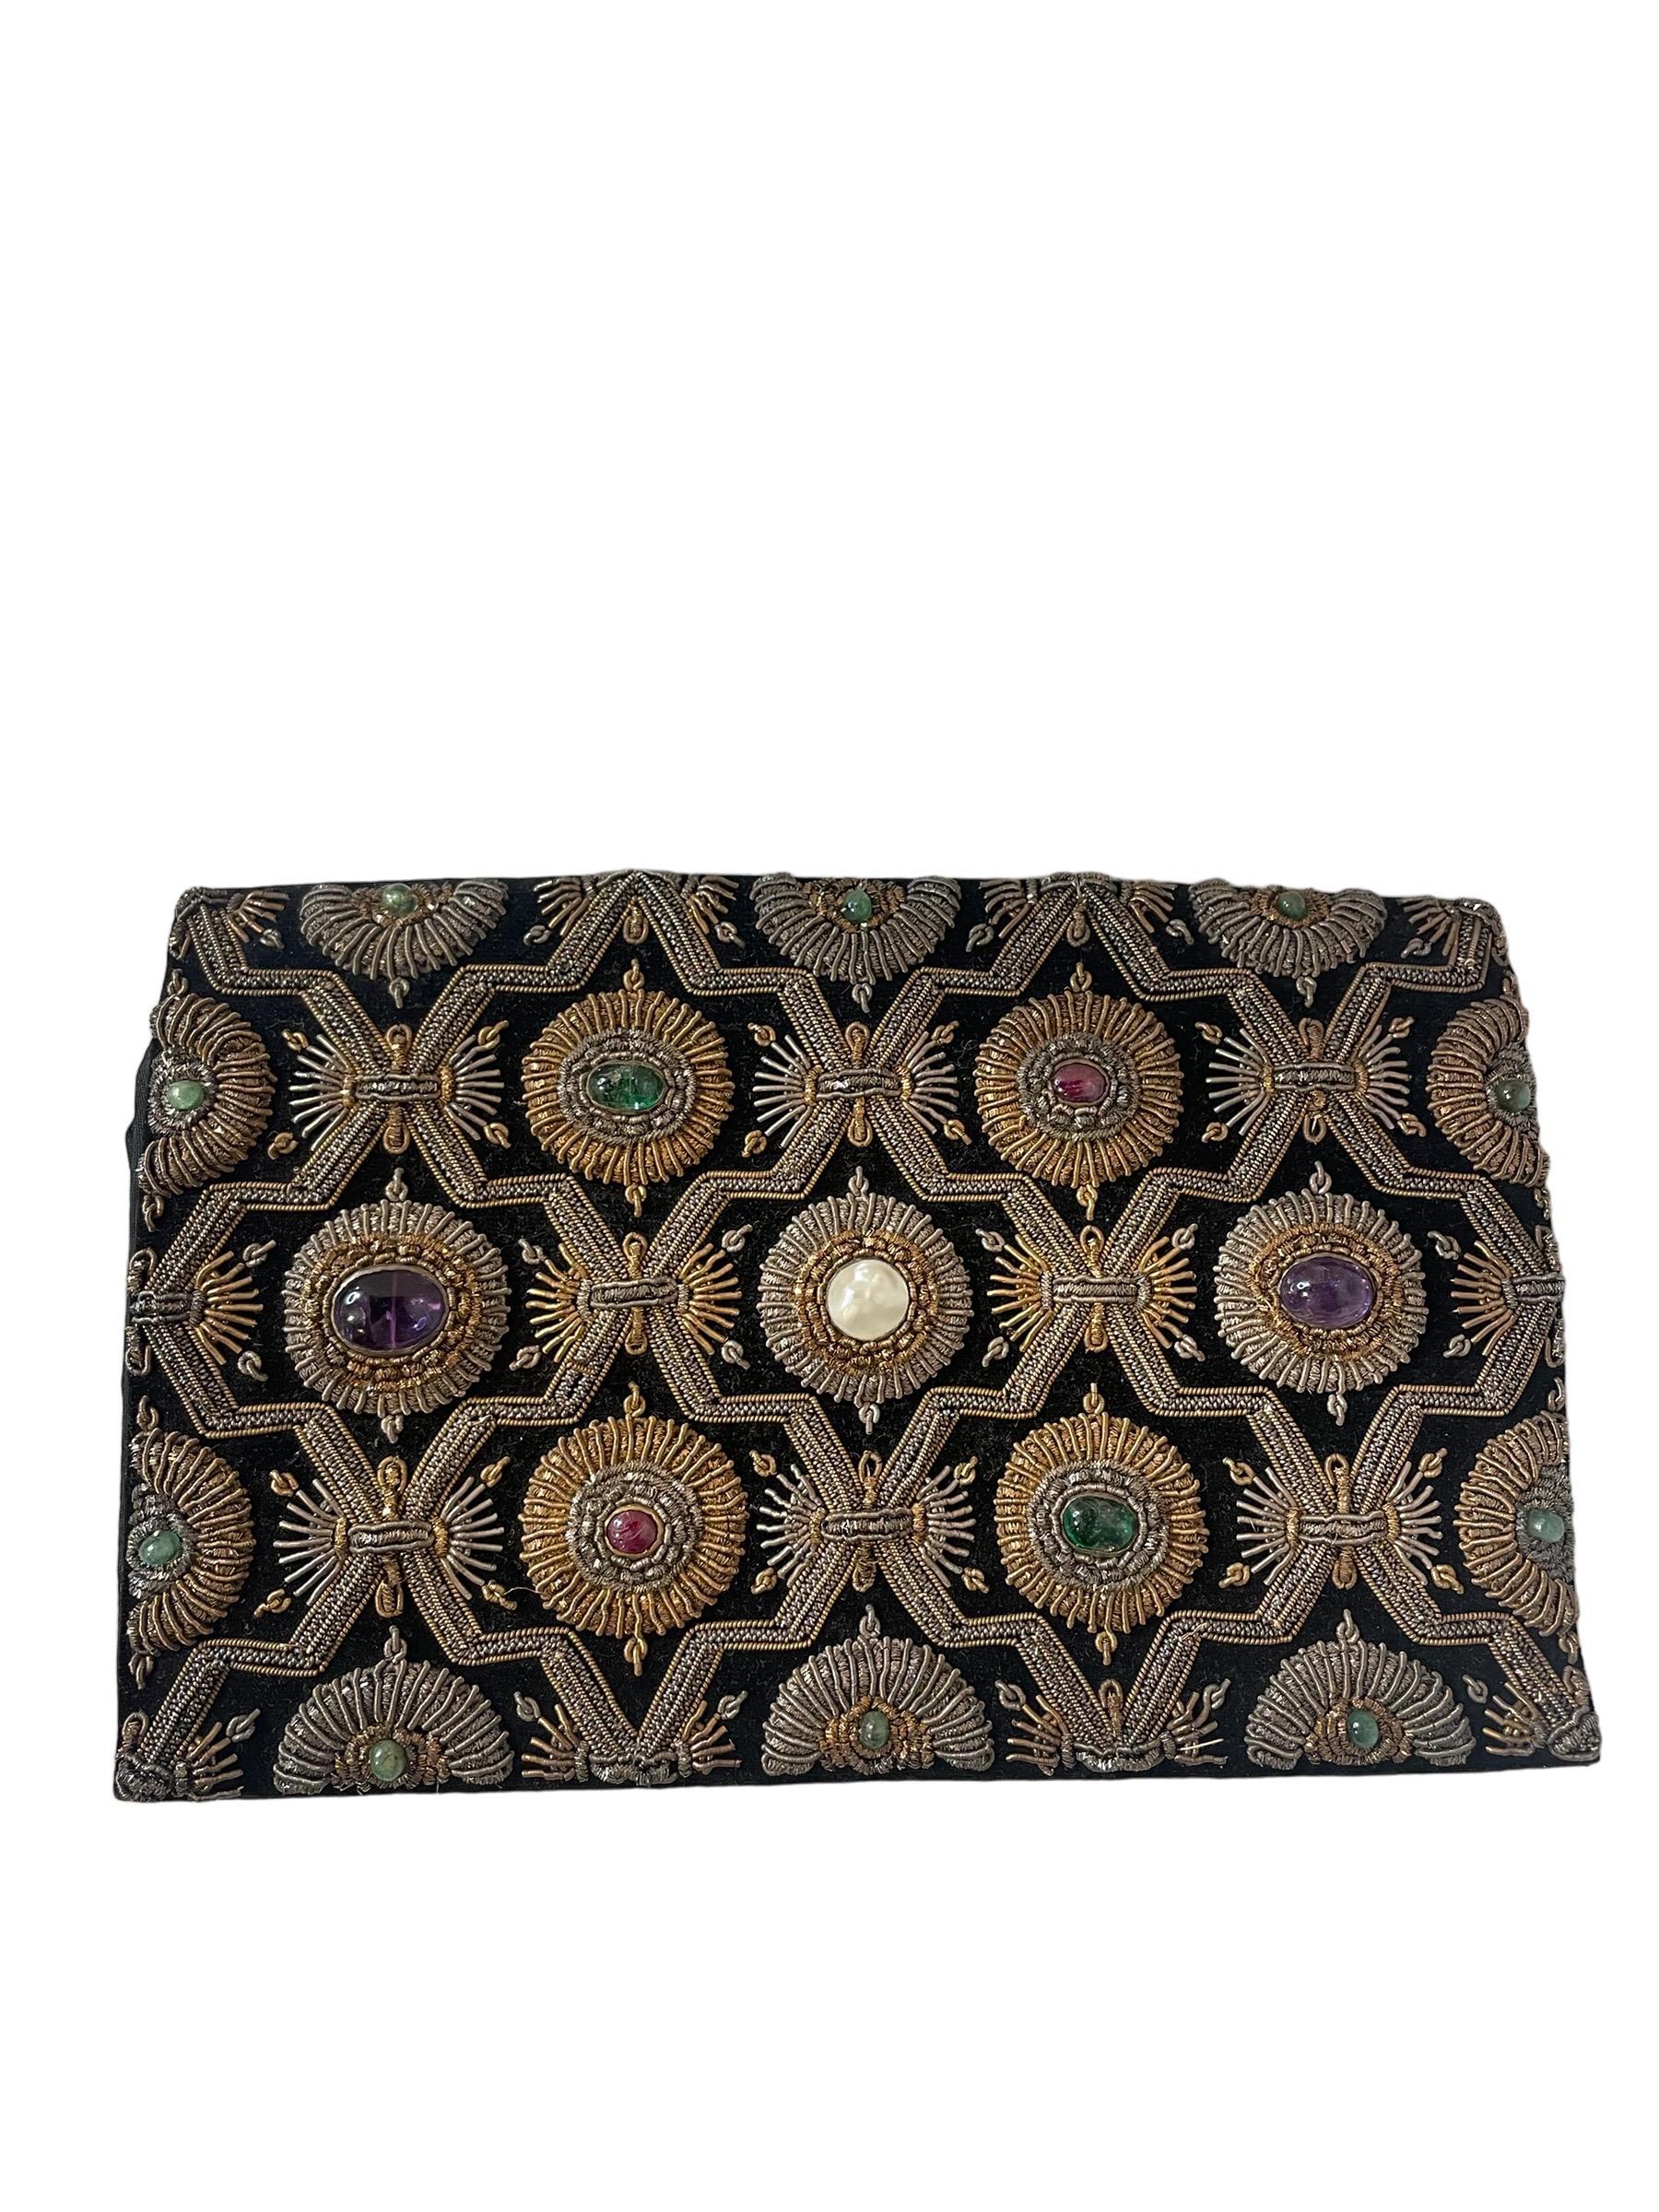 1960s Indian Bejeweled Zari Zardozi Velvet Clutch Purse

Rare Zari Zardozi bejeweled evening clutch inspired by Van Cleef and Arpes from the 1920s. A shimmering rectangular bag, embroidered with quatrefoil lattice design in gold and silver metallic